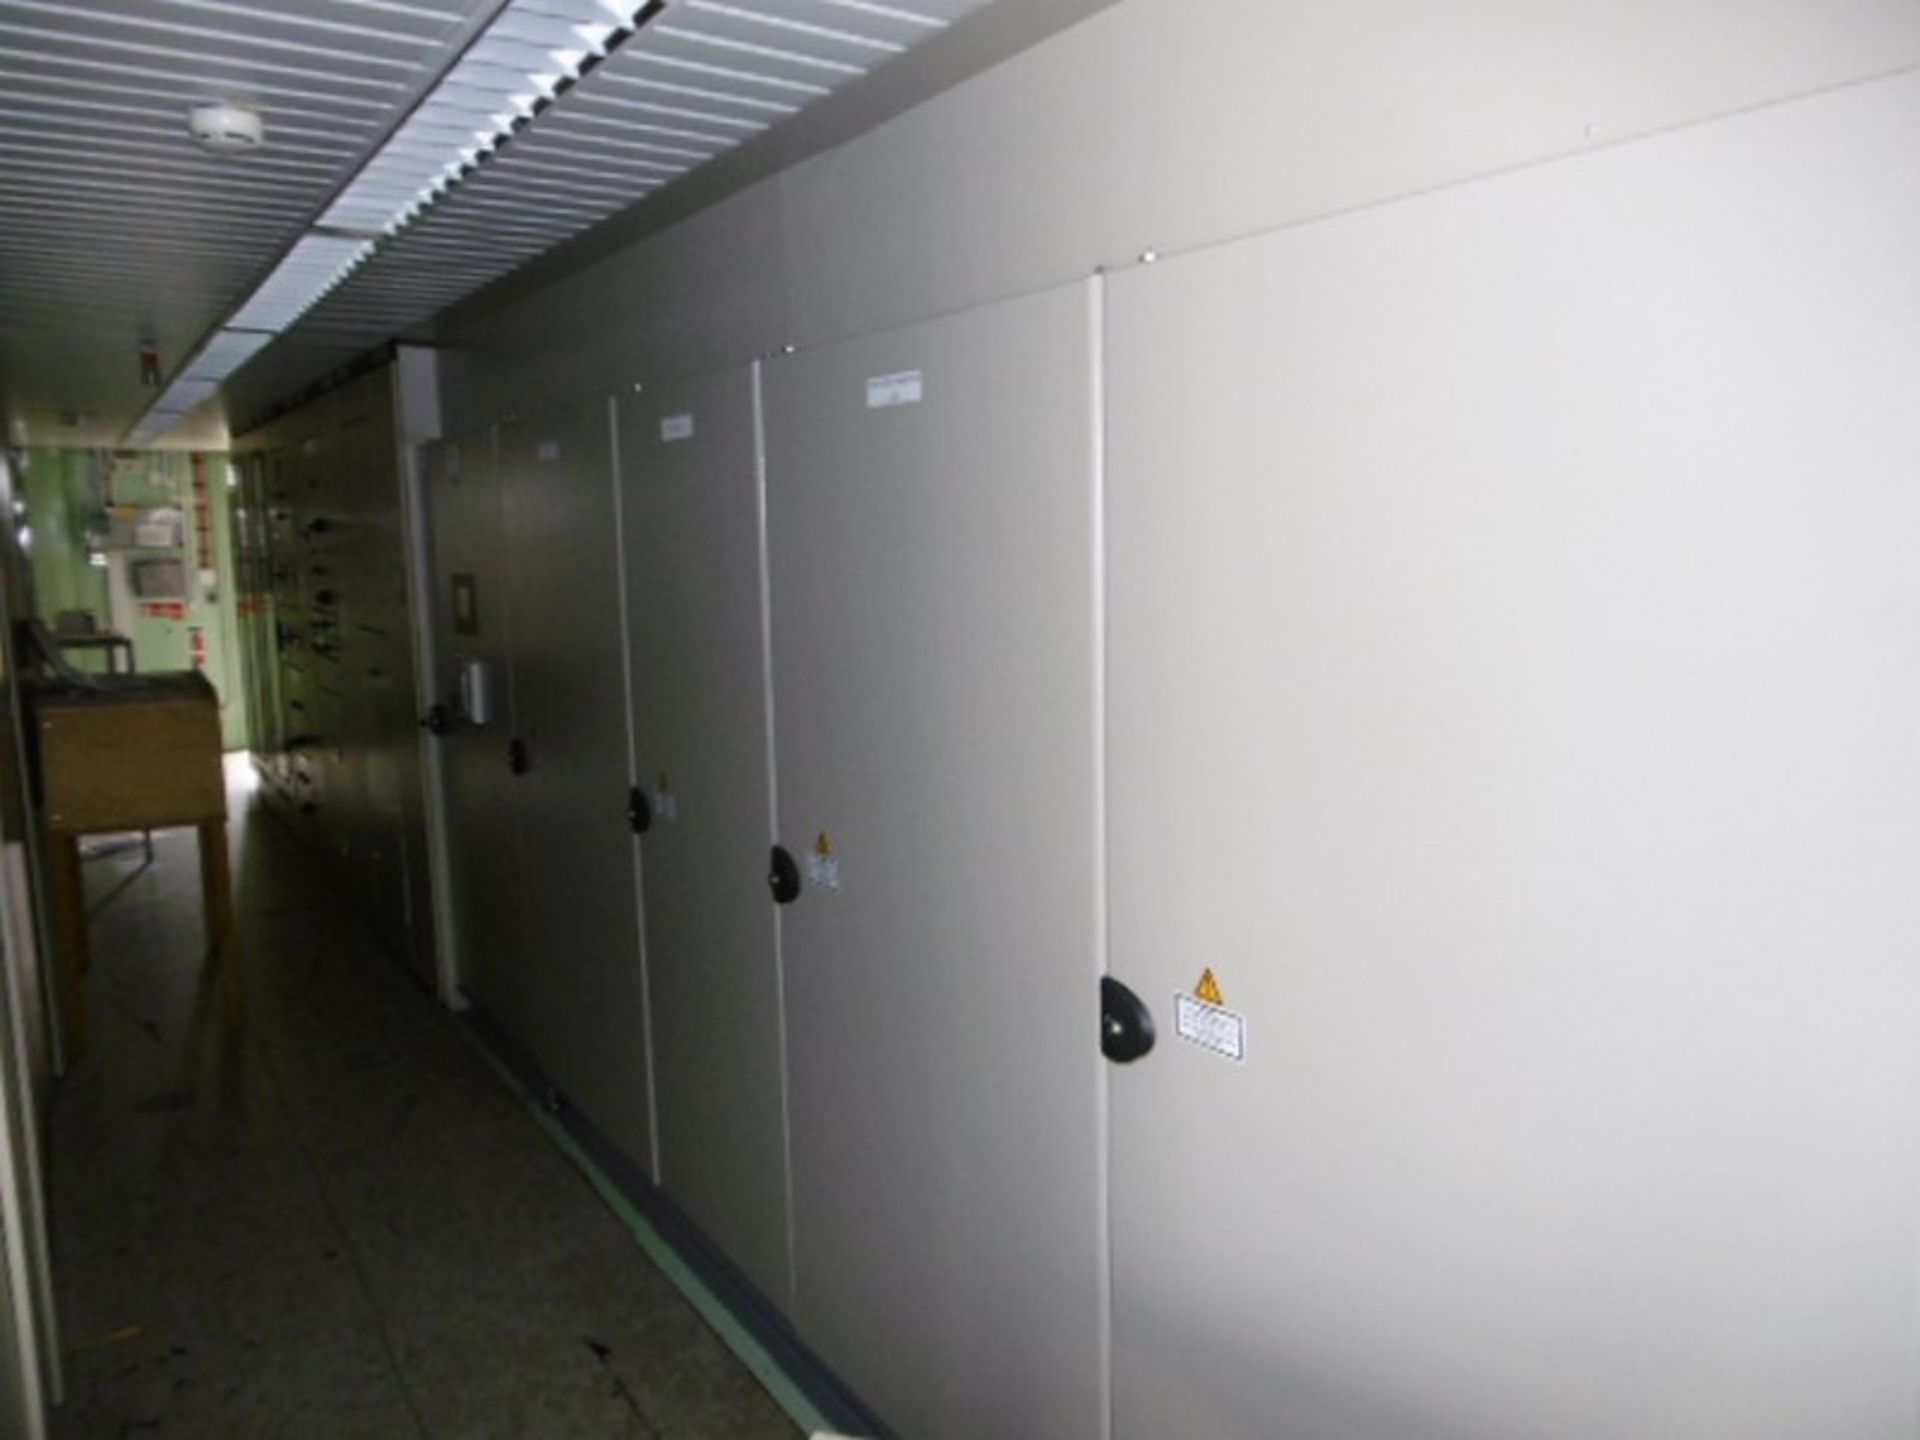 Large Qty Switchgear - From Gas Turbine 1 Control Module Building - Image 4 of 33